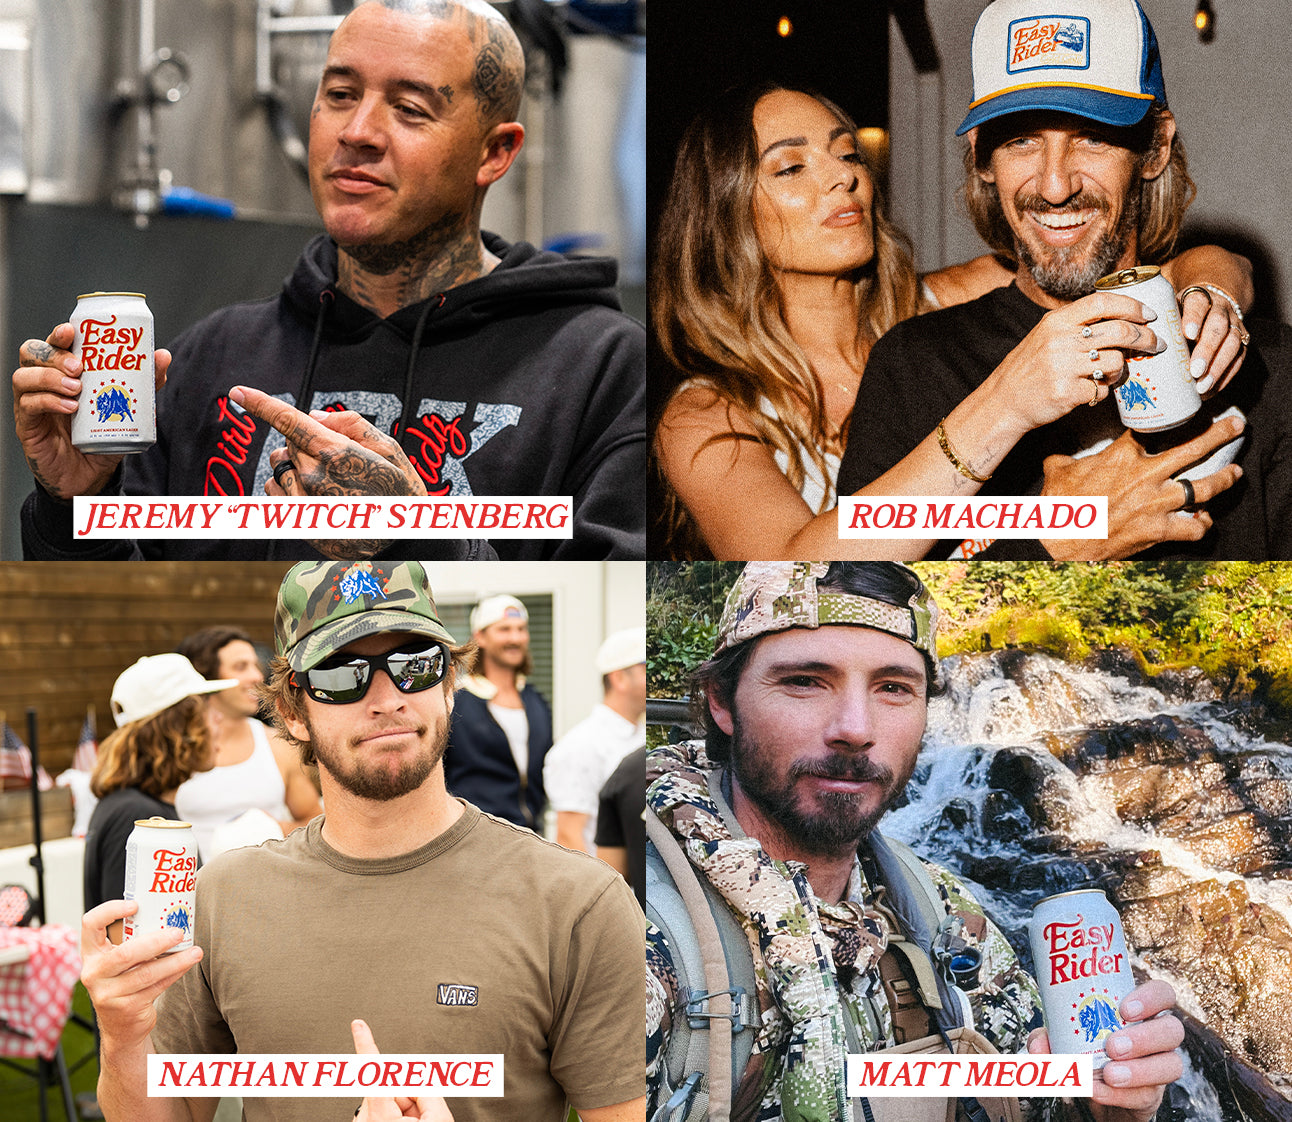 A picture grid of Easy Rider's ambassadors: Twitch holding an Easy Rider can; Rob Machado and his wife with Easy Rider cans; Nathan Florence smiling with an Easy Rider can and Matt Meola out hunting with an Easy Rider can